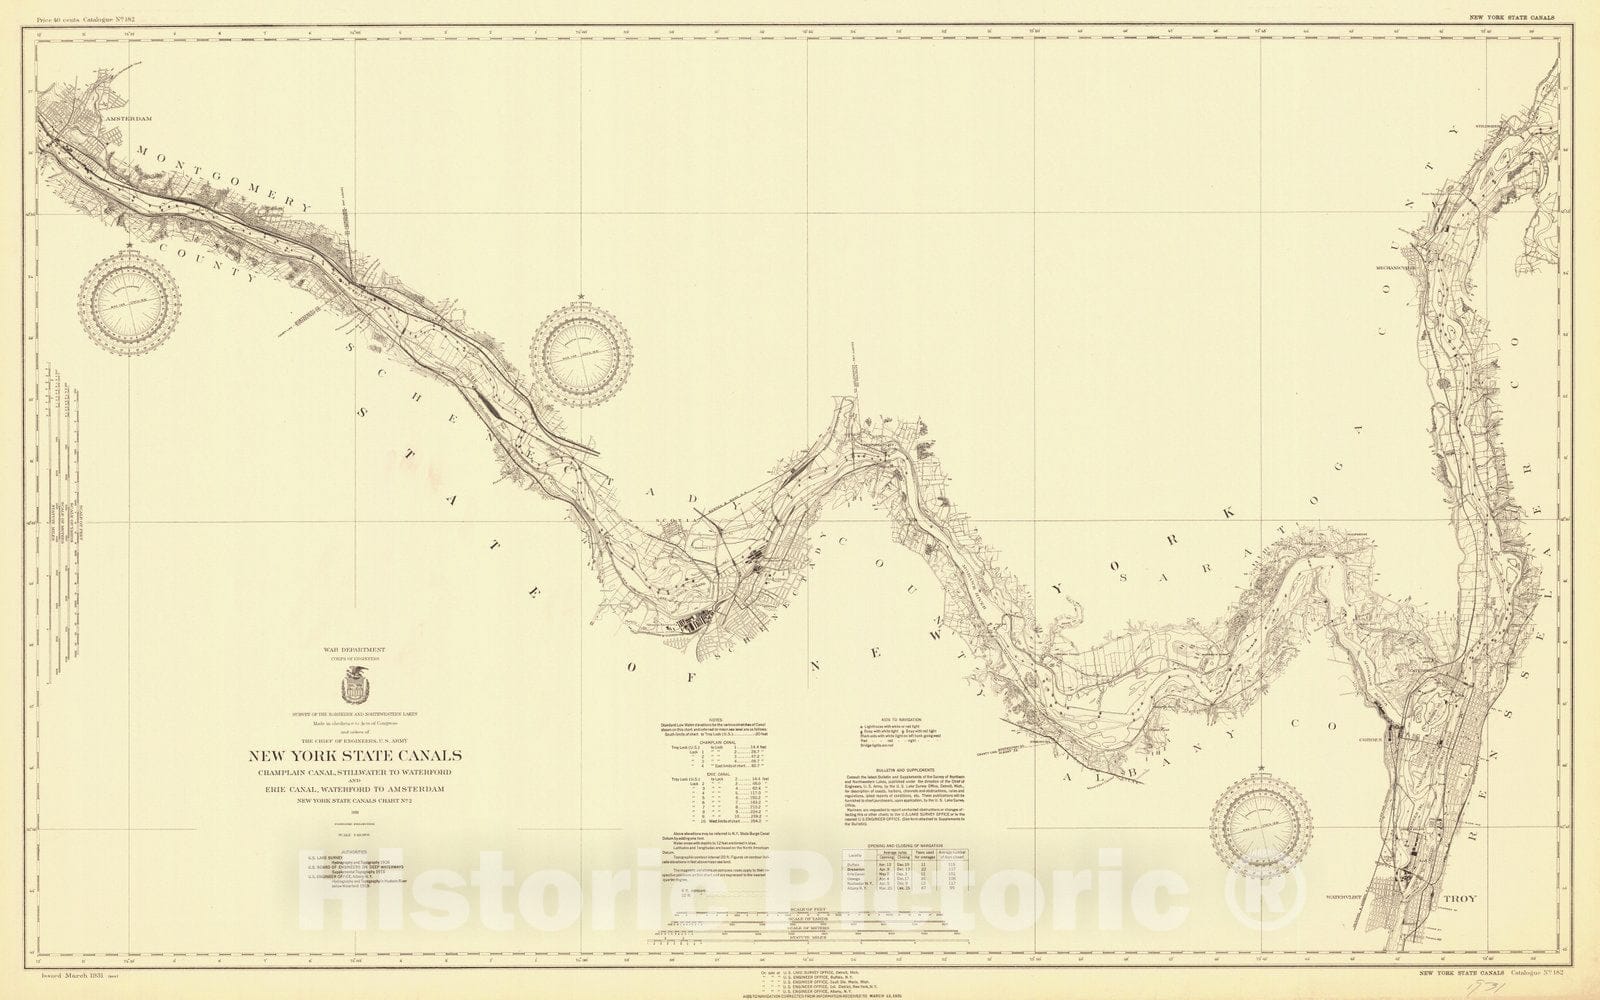 Historic Nautical Map - New York State Canals. Champlain Canal, Stillwater To Waterford And Erie Canal, Waterford To Amsterdam, 1931 NOAA Chart - Vintage Wall Art